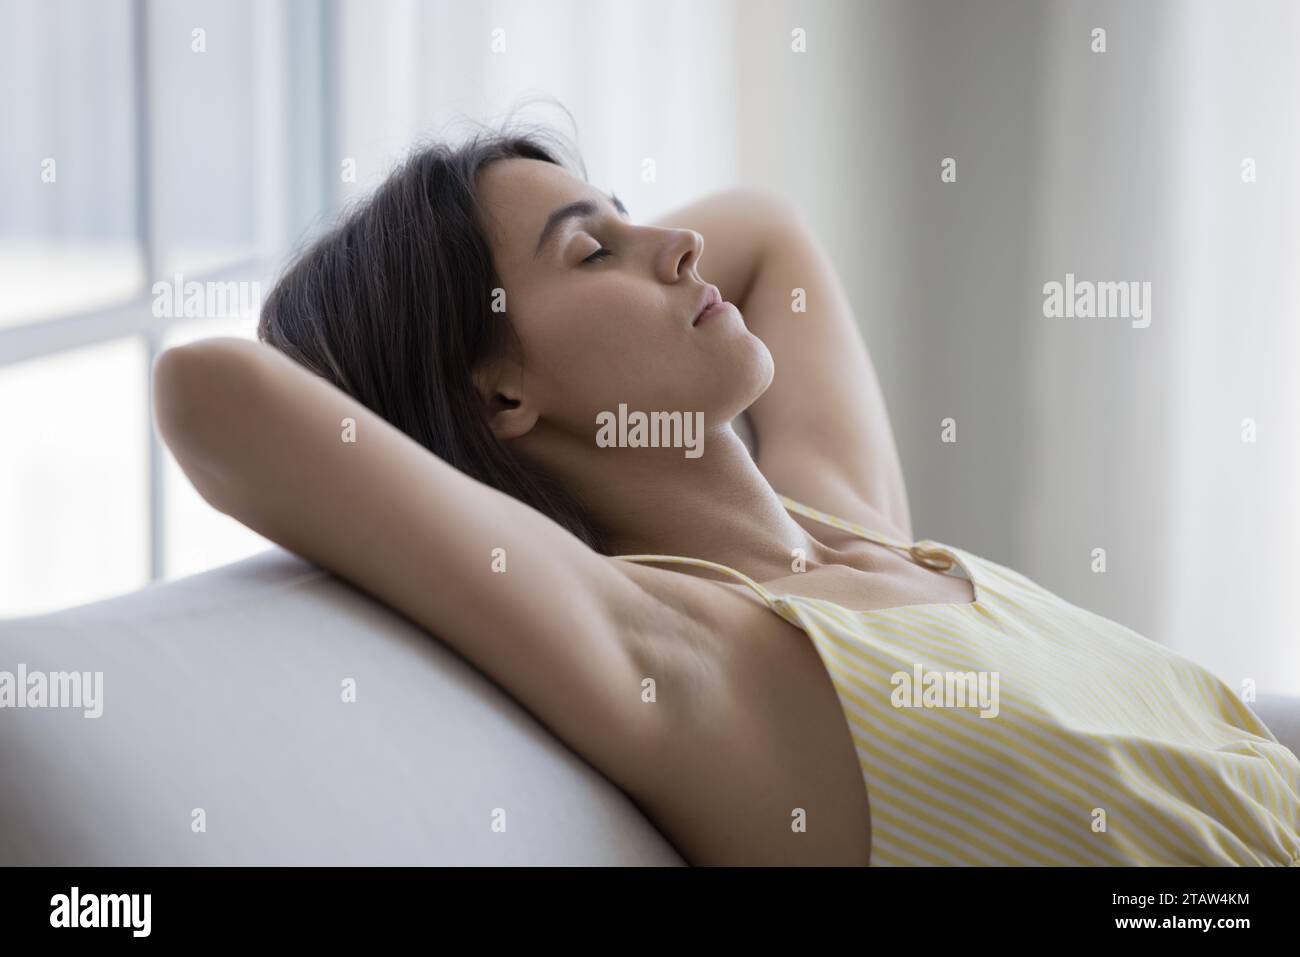 Silent attractive woman having daytime nap leaned on couch Stock Photo